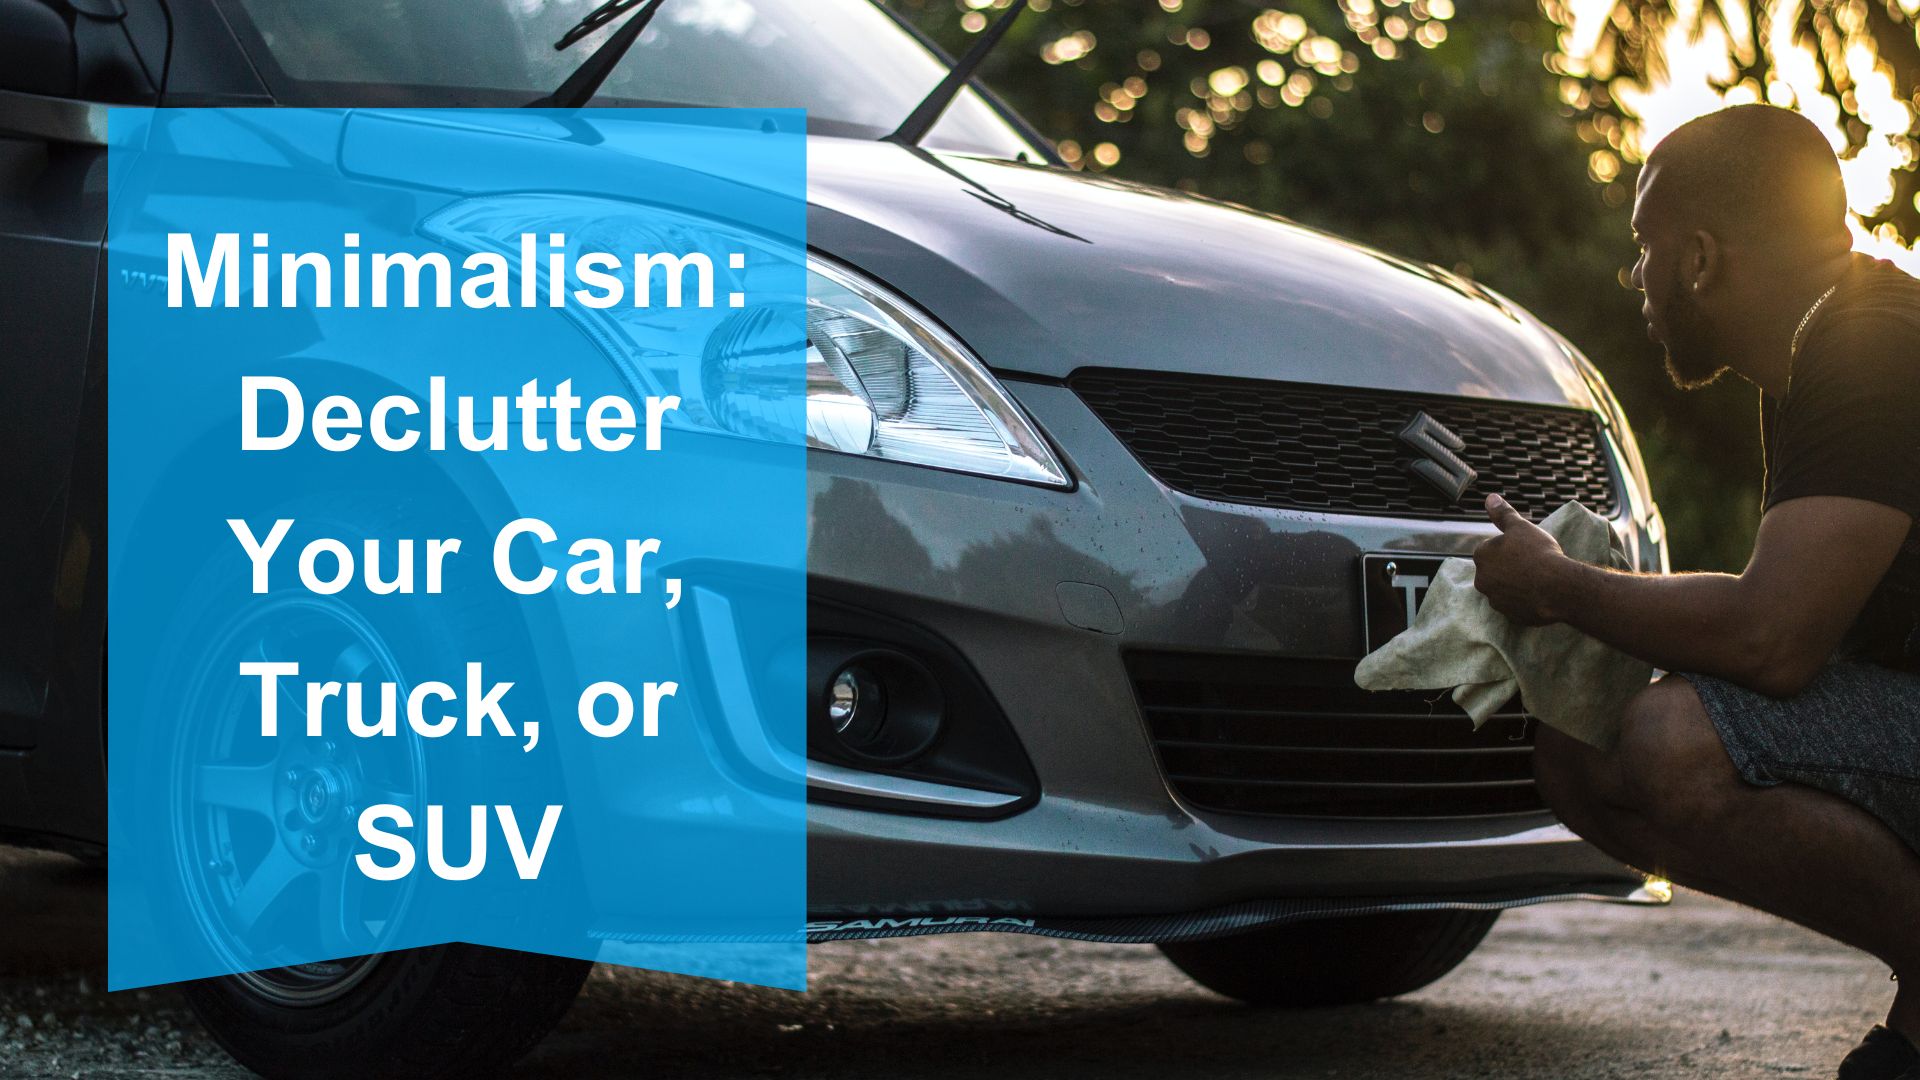 Minimalism: Declutter Your Car, Truck, or SUV